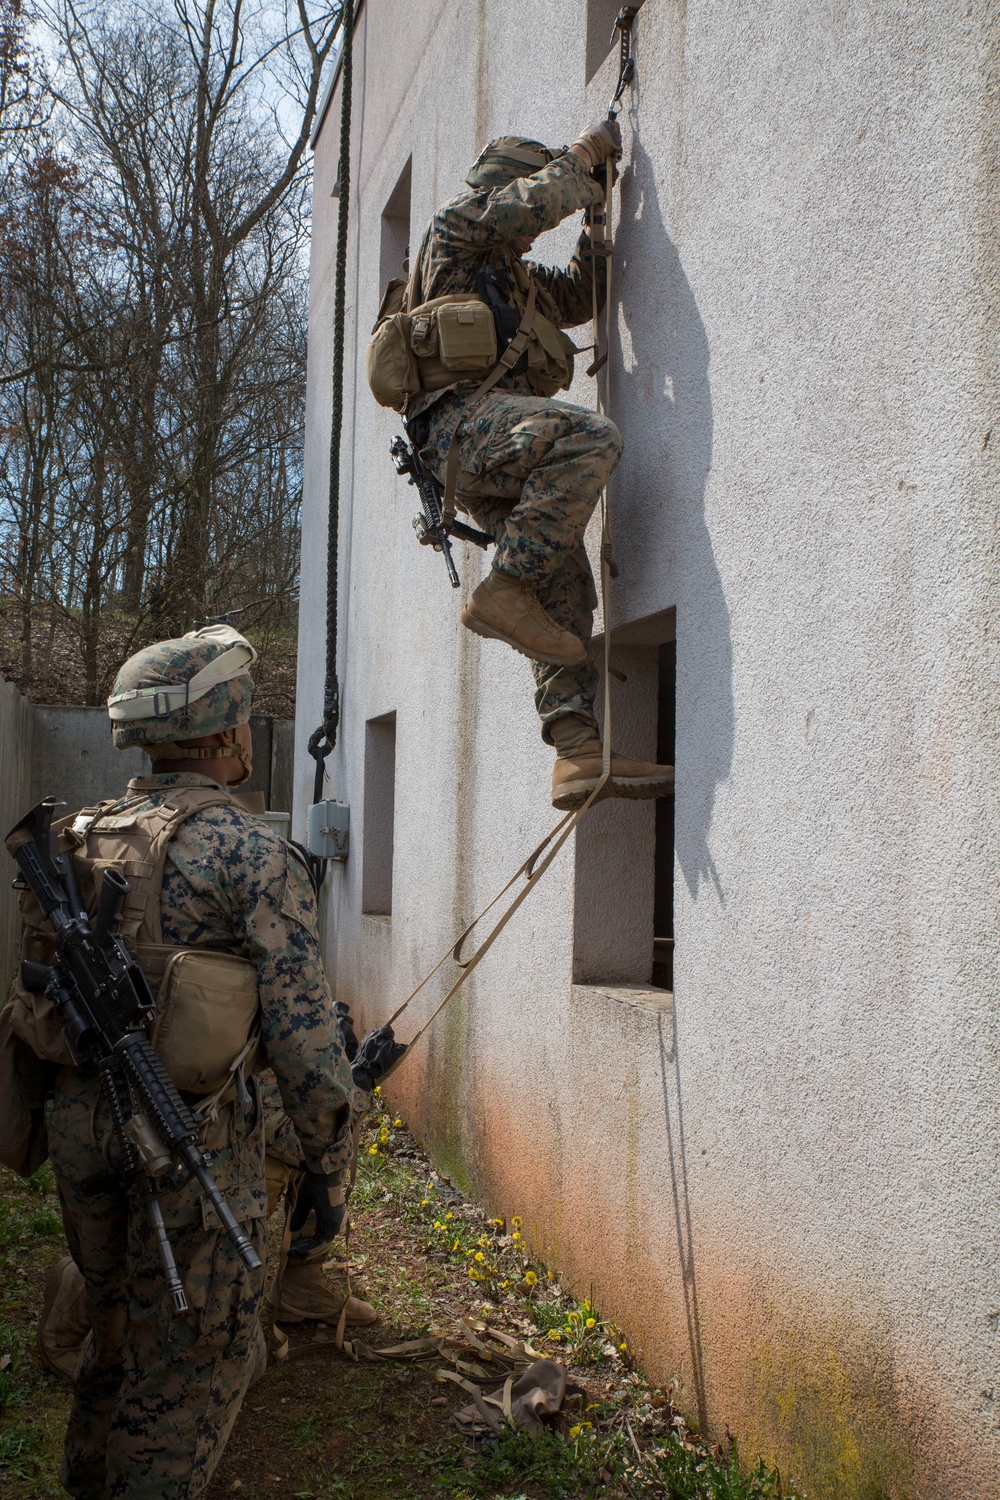 CLIMBEX: U.S. Marines test agility with urban obstacle course